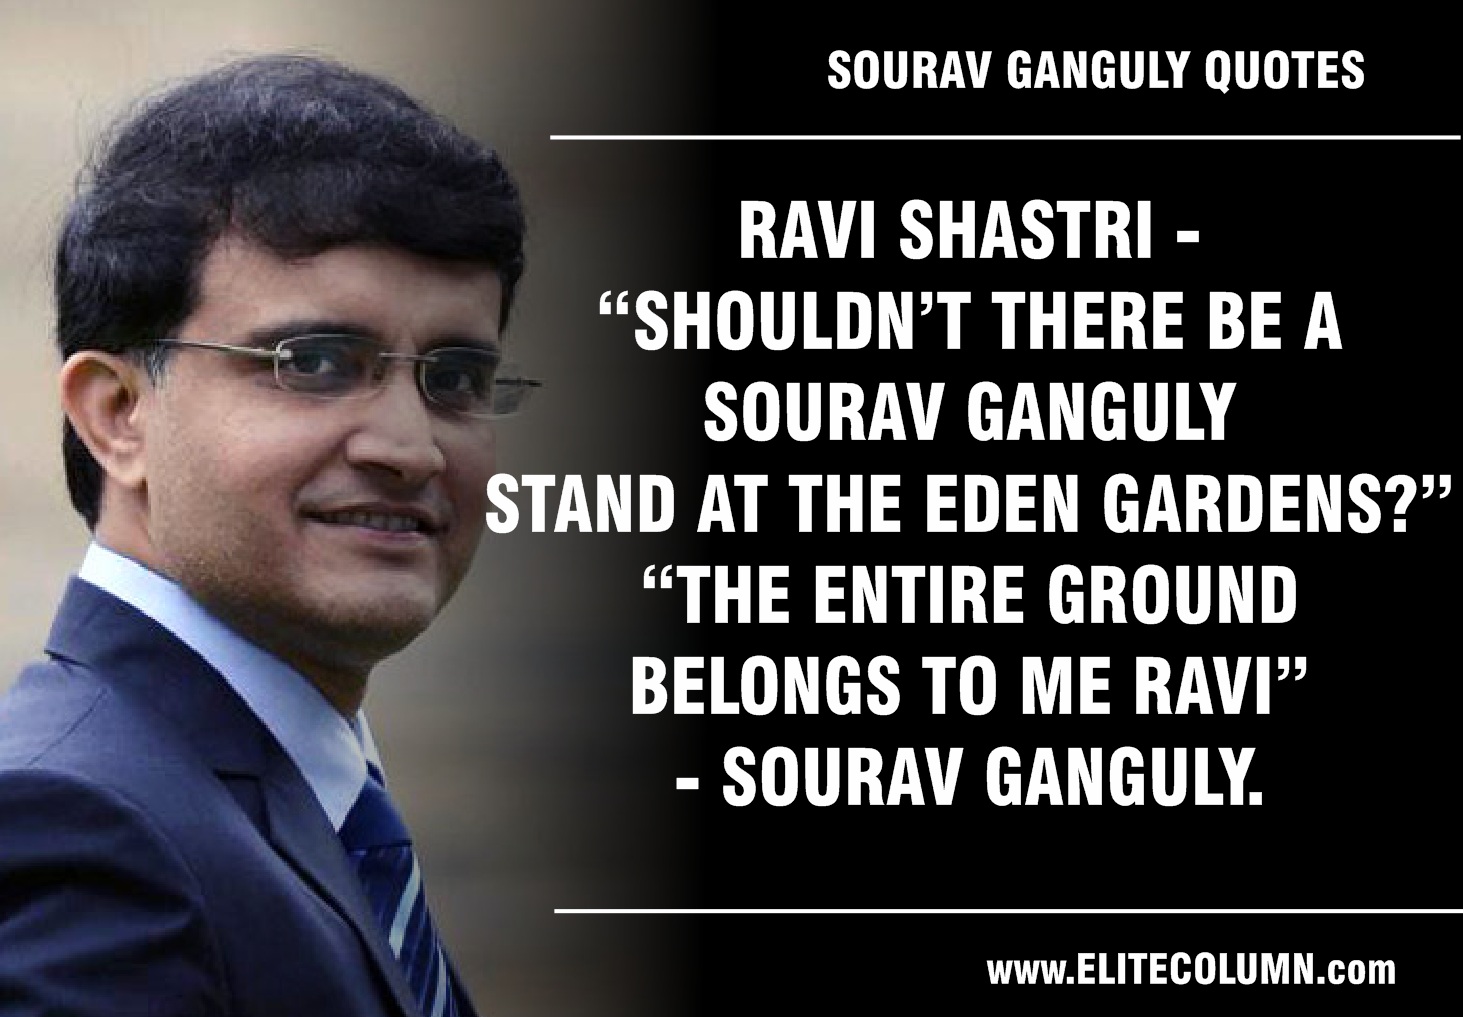 Sourav Ganguly Quotes (6)